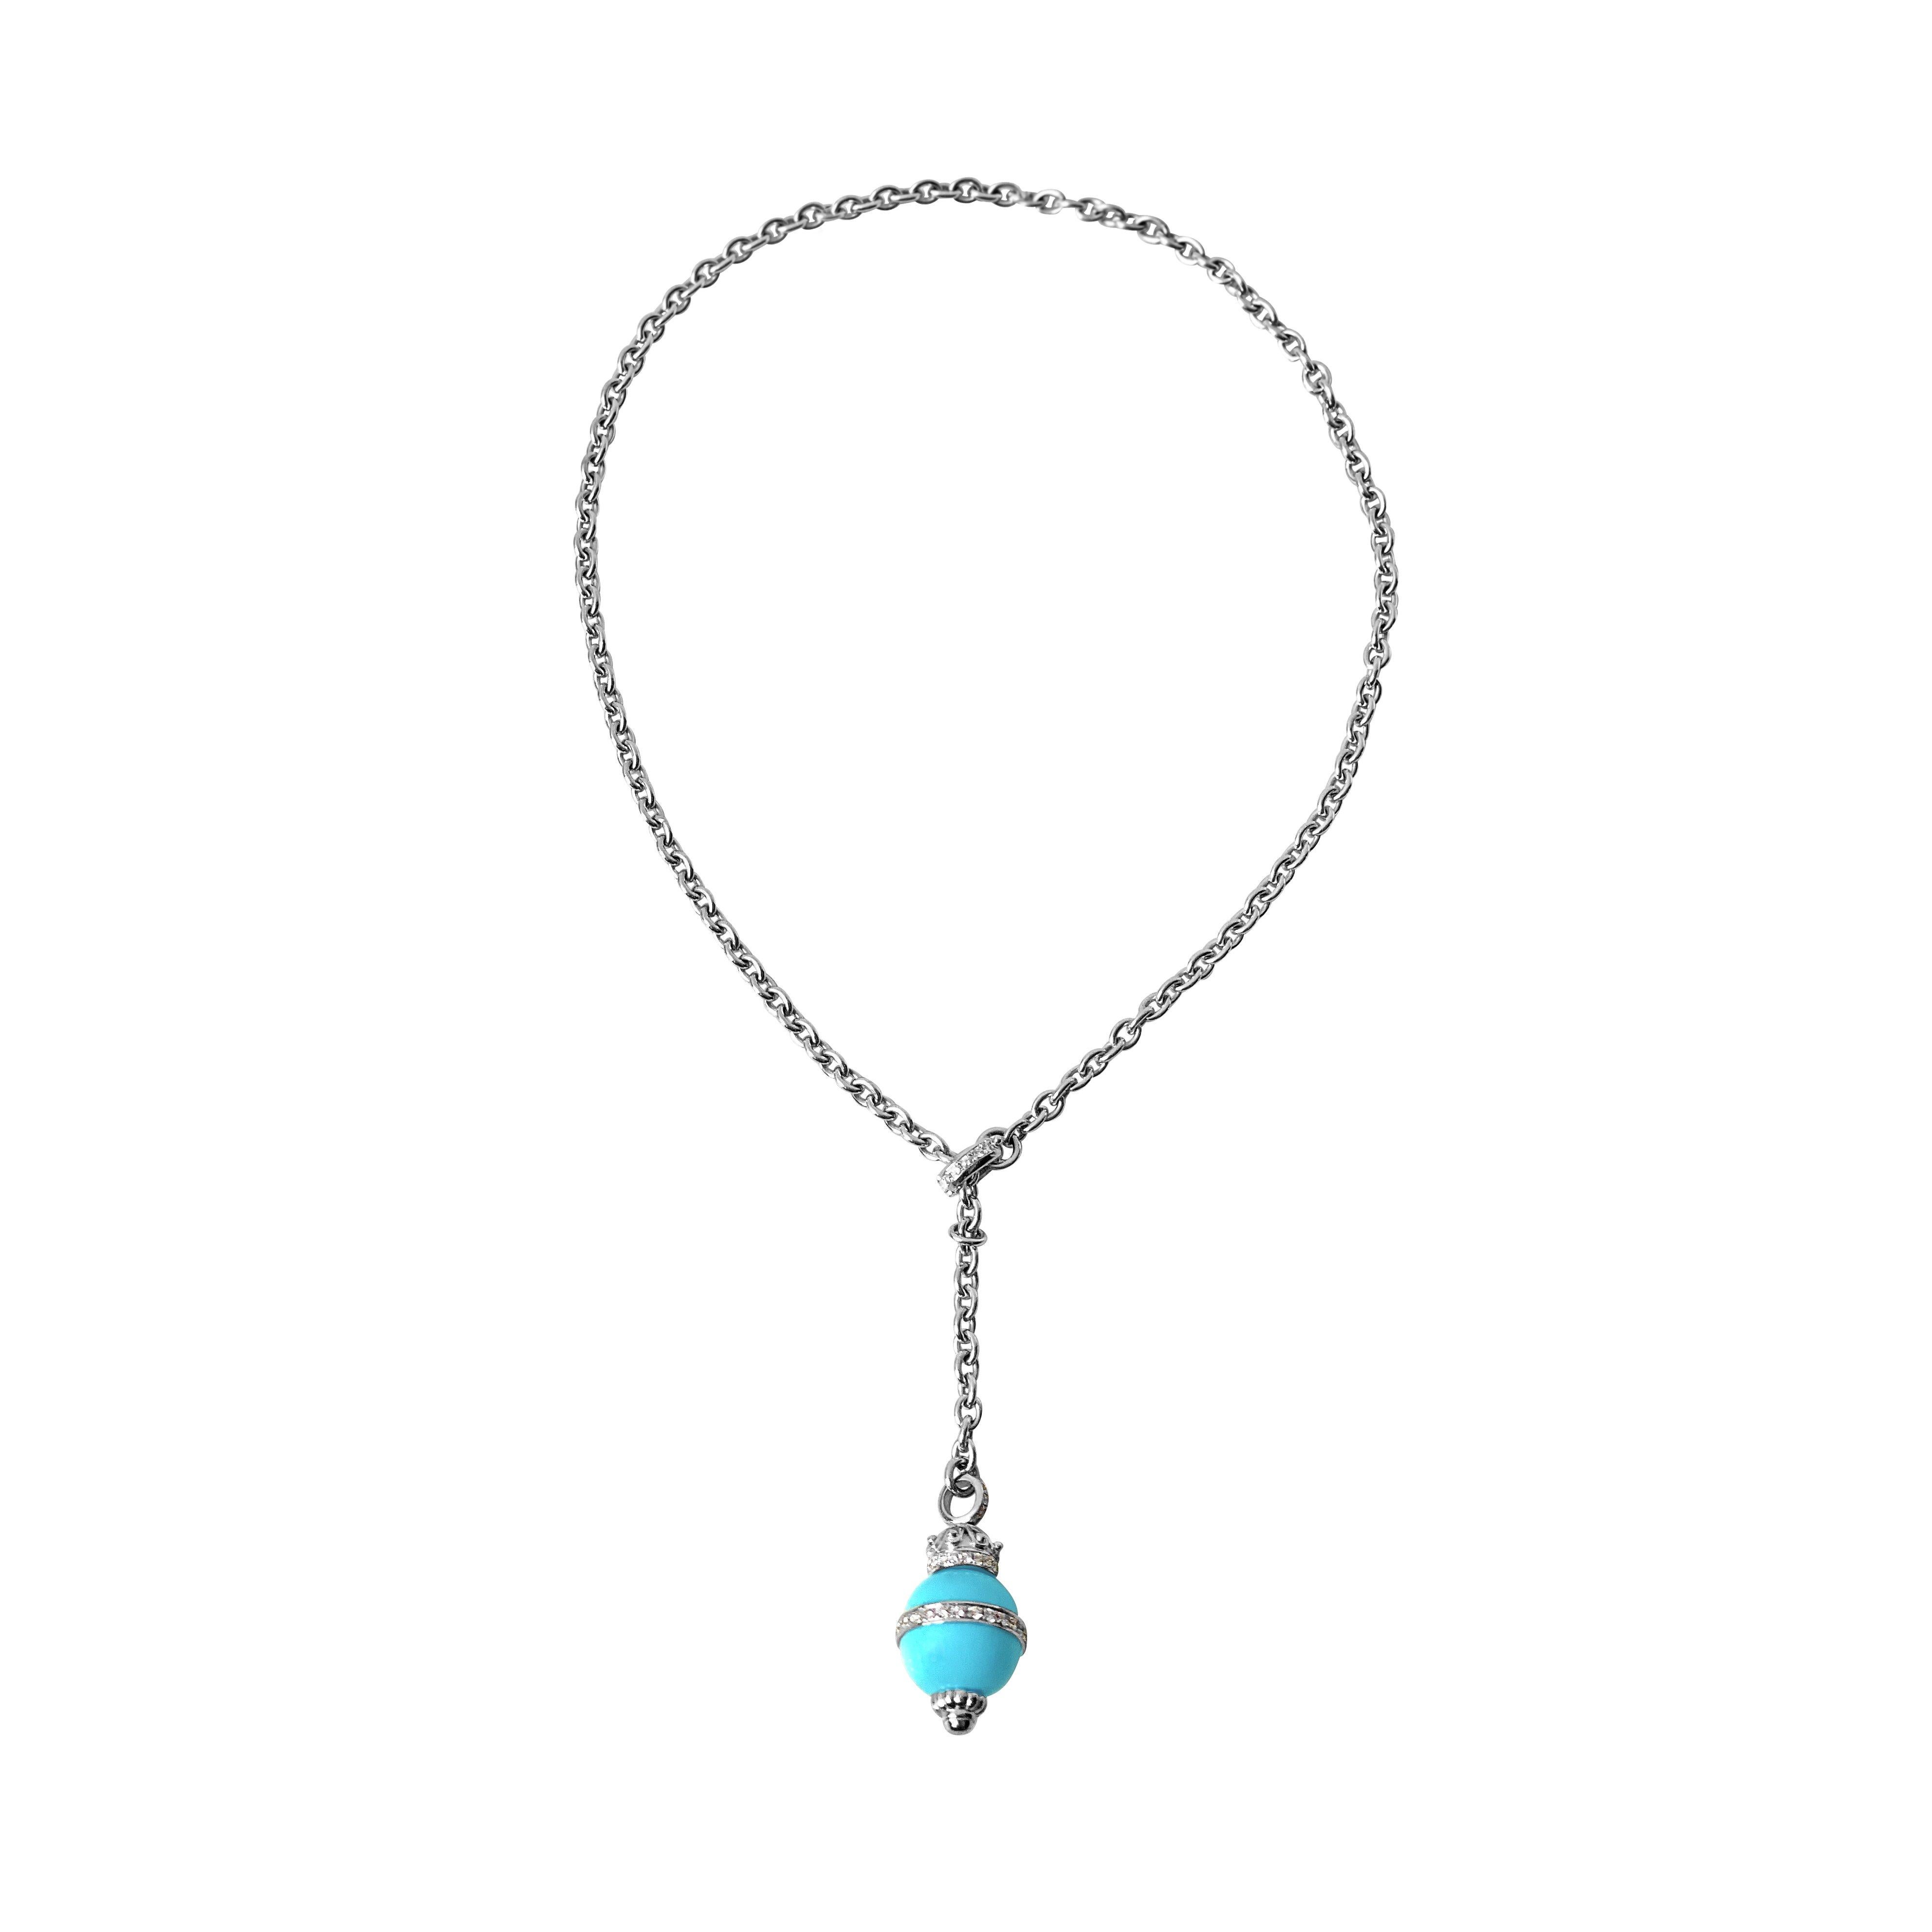 Matthia's & Claire Etrusca Collection Pendant: Elegant and interchangeable lariat necklace featuring a stunning turquoise and diamond pendant. Pendants also available in coral, and onyx to mix and match.

Specifications:
- 18k white gold and